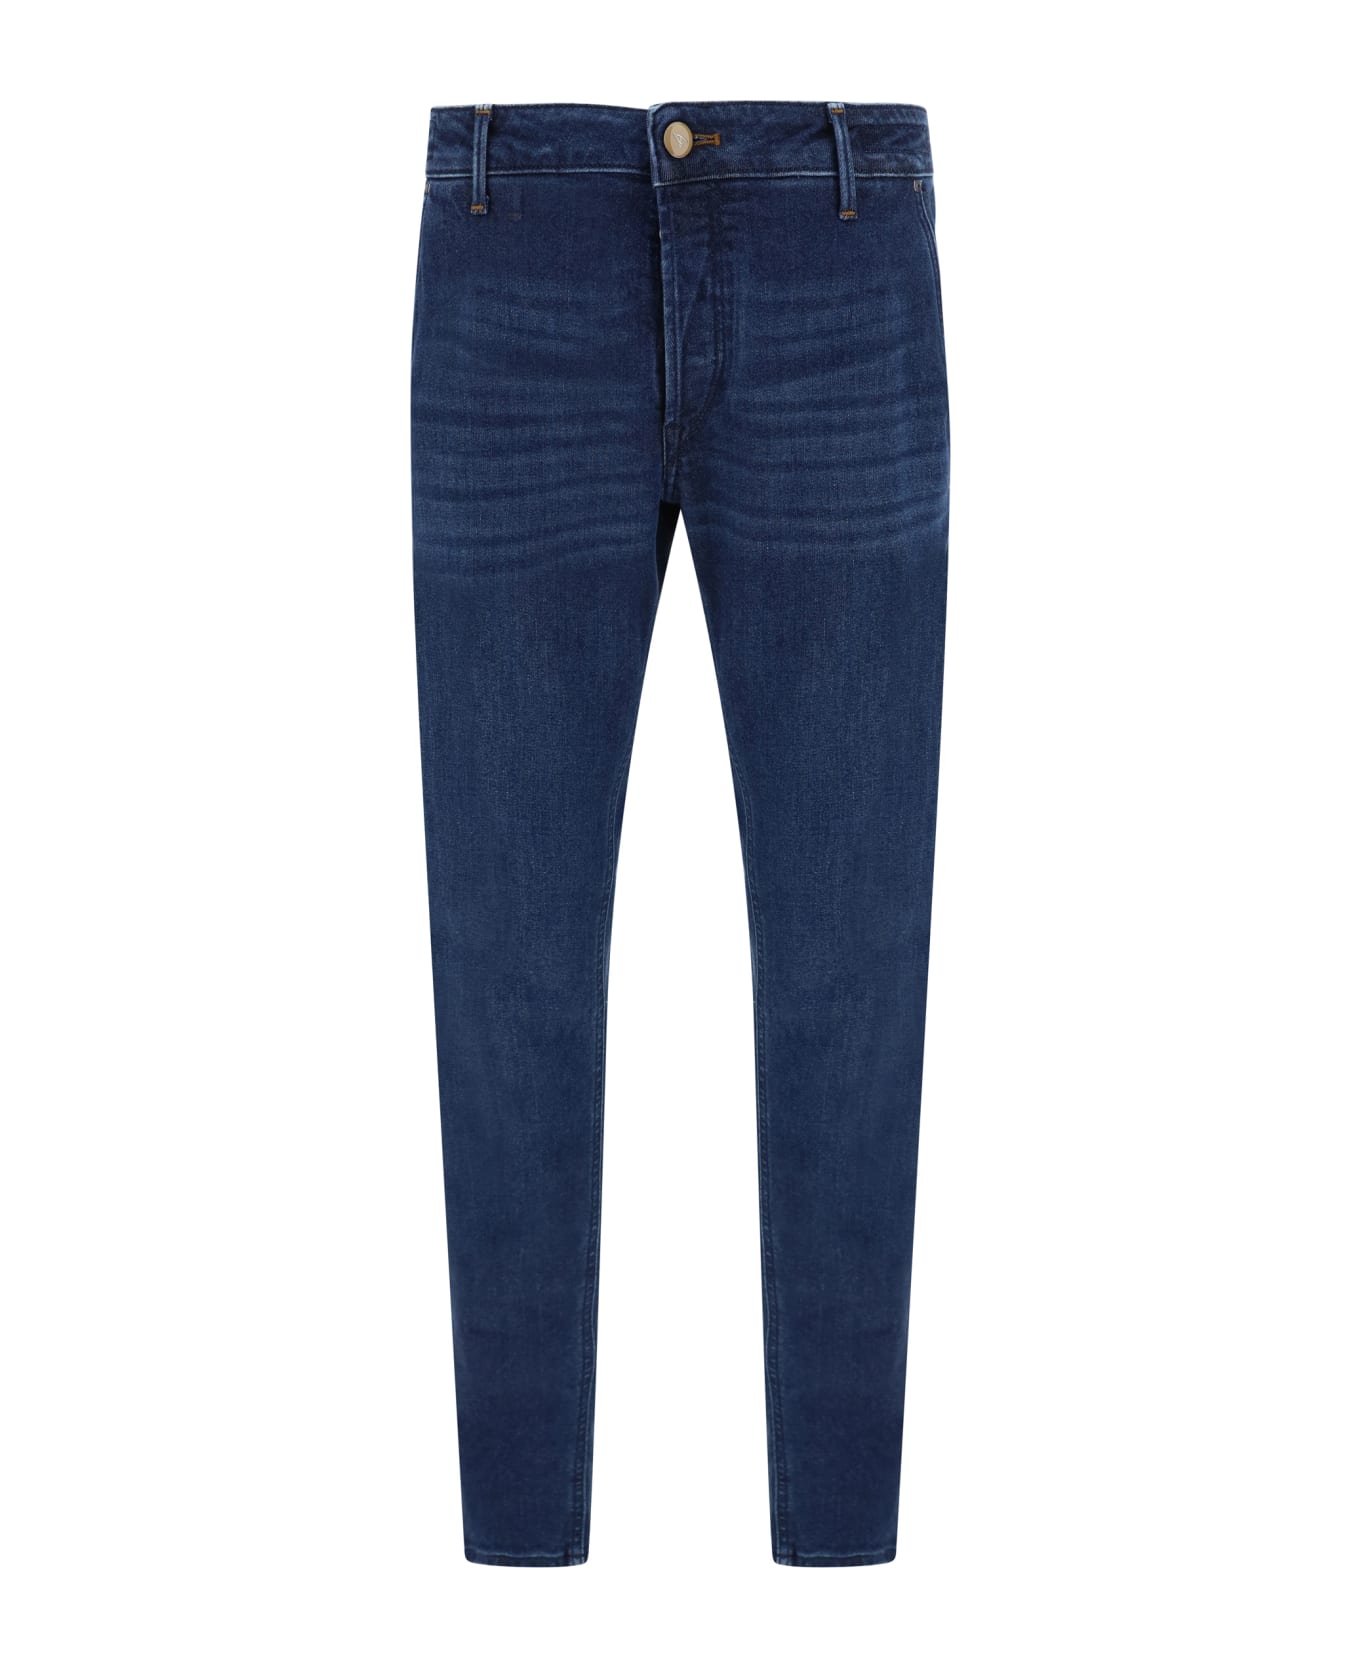 Hand Picked Jeans - Lav.1